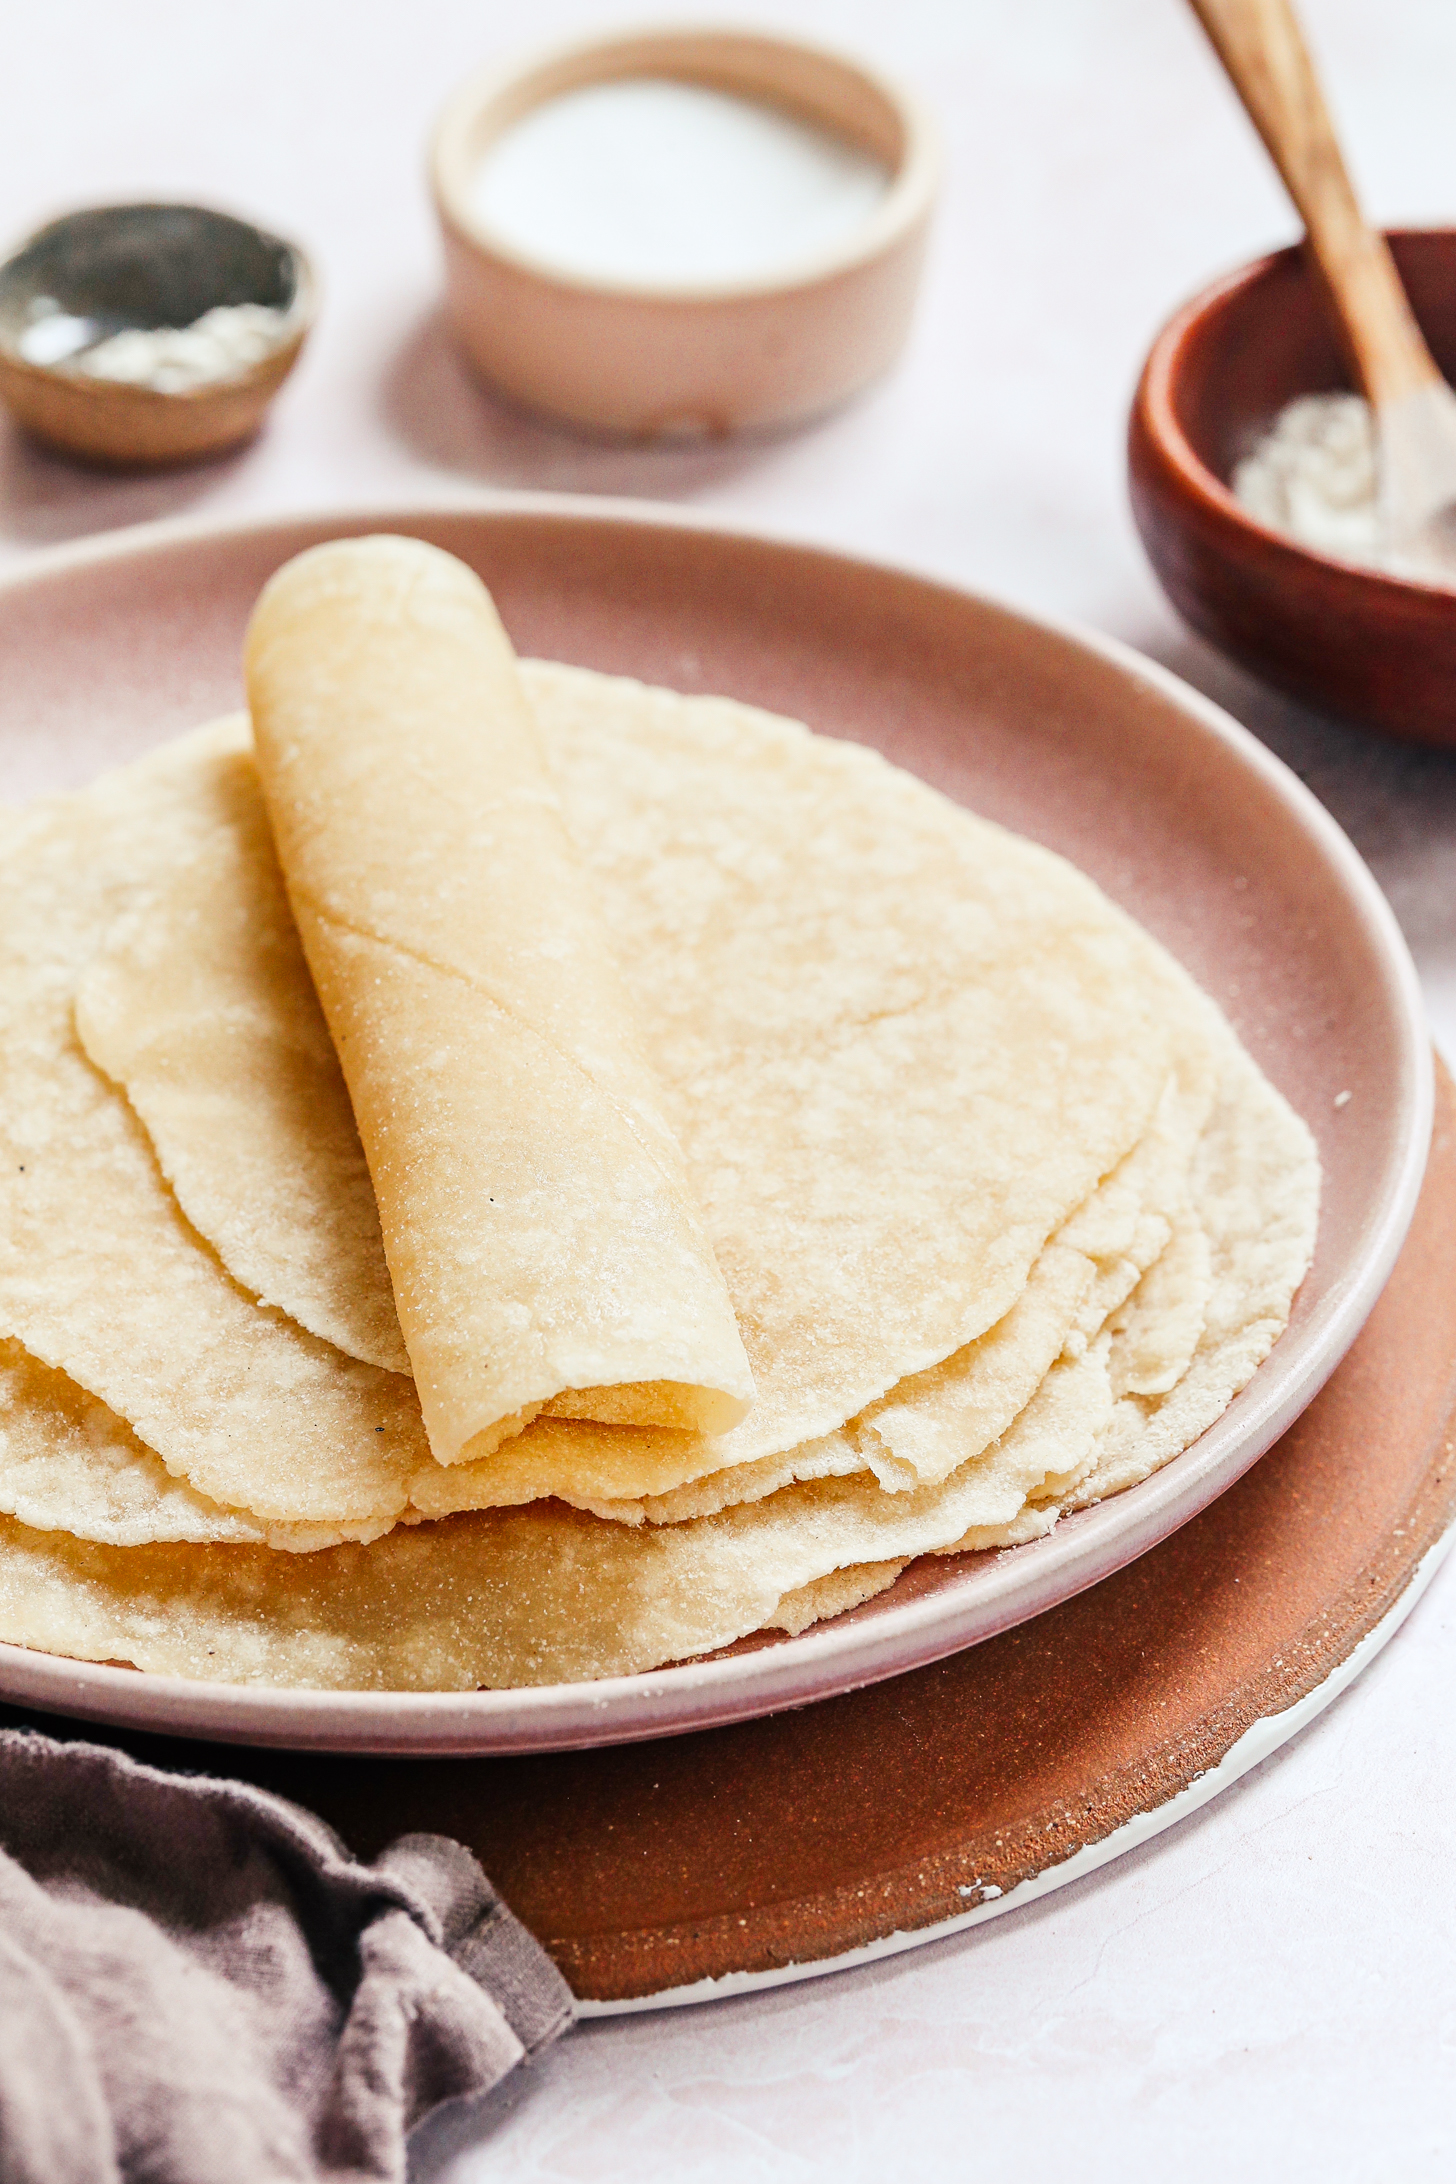 Rolled up cassava flour tortilla on a plate with more tortillas under it